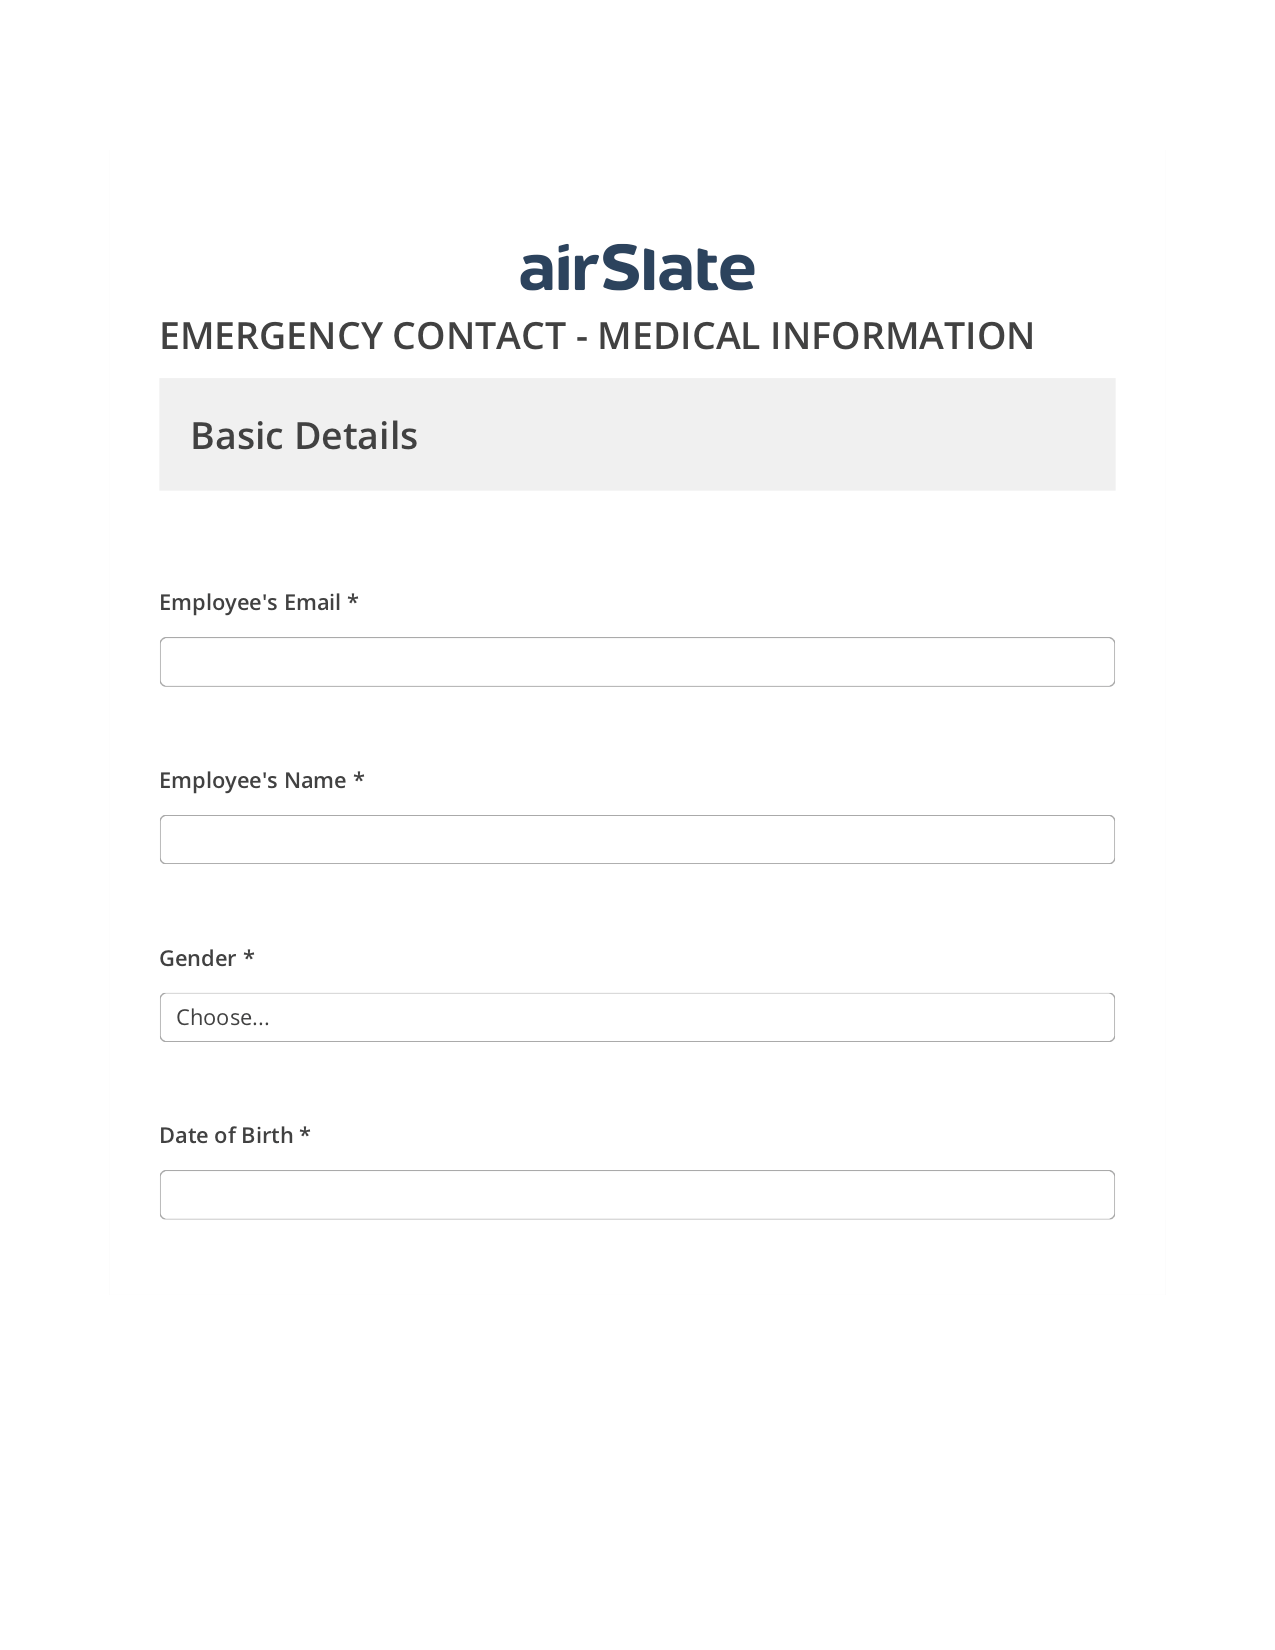 Emergency Contact Flow Pre-fill from CSV File Bot